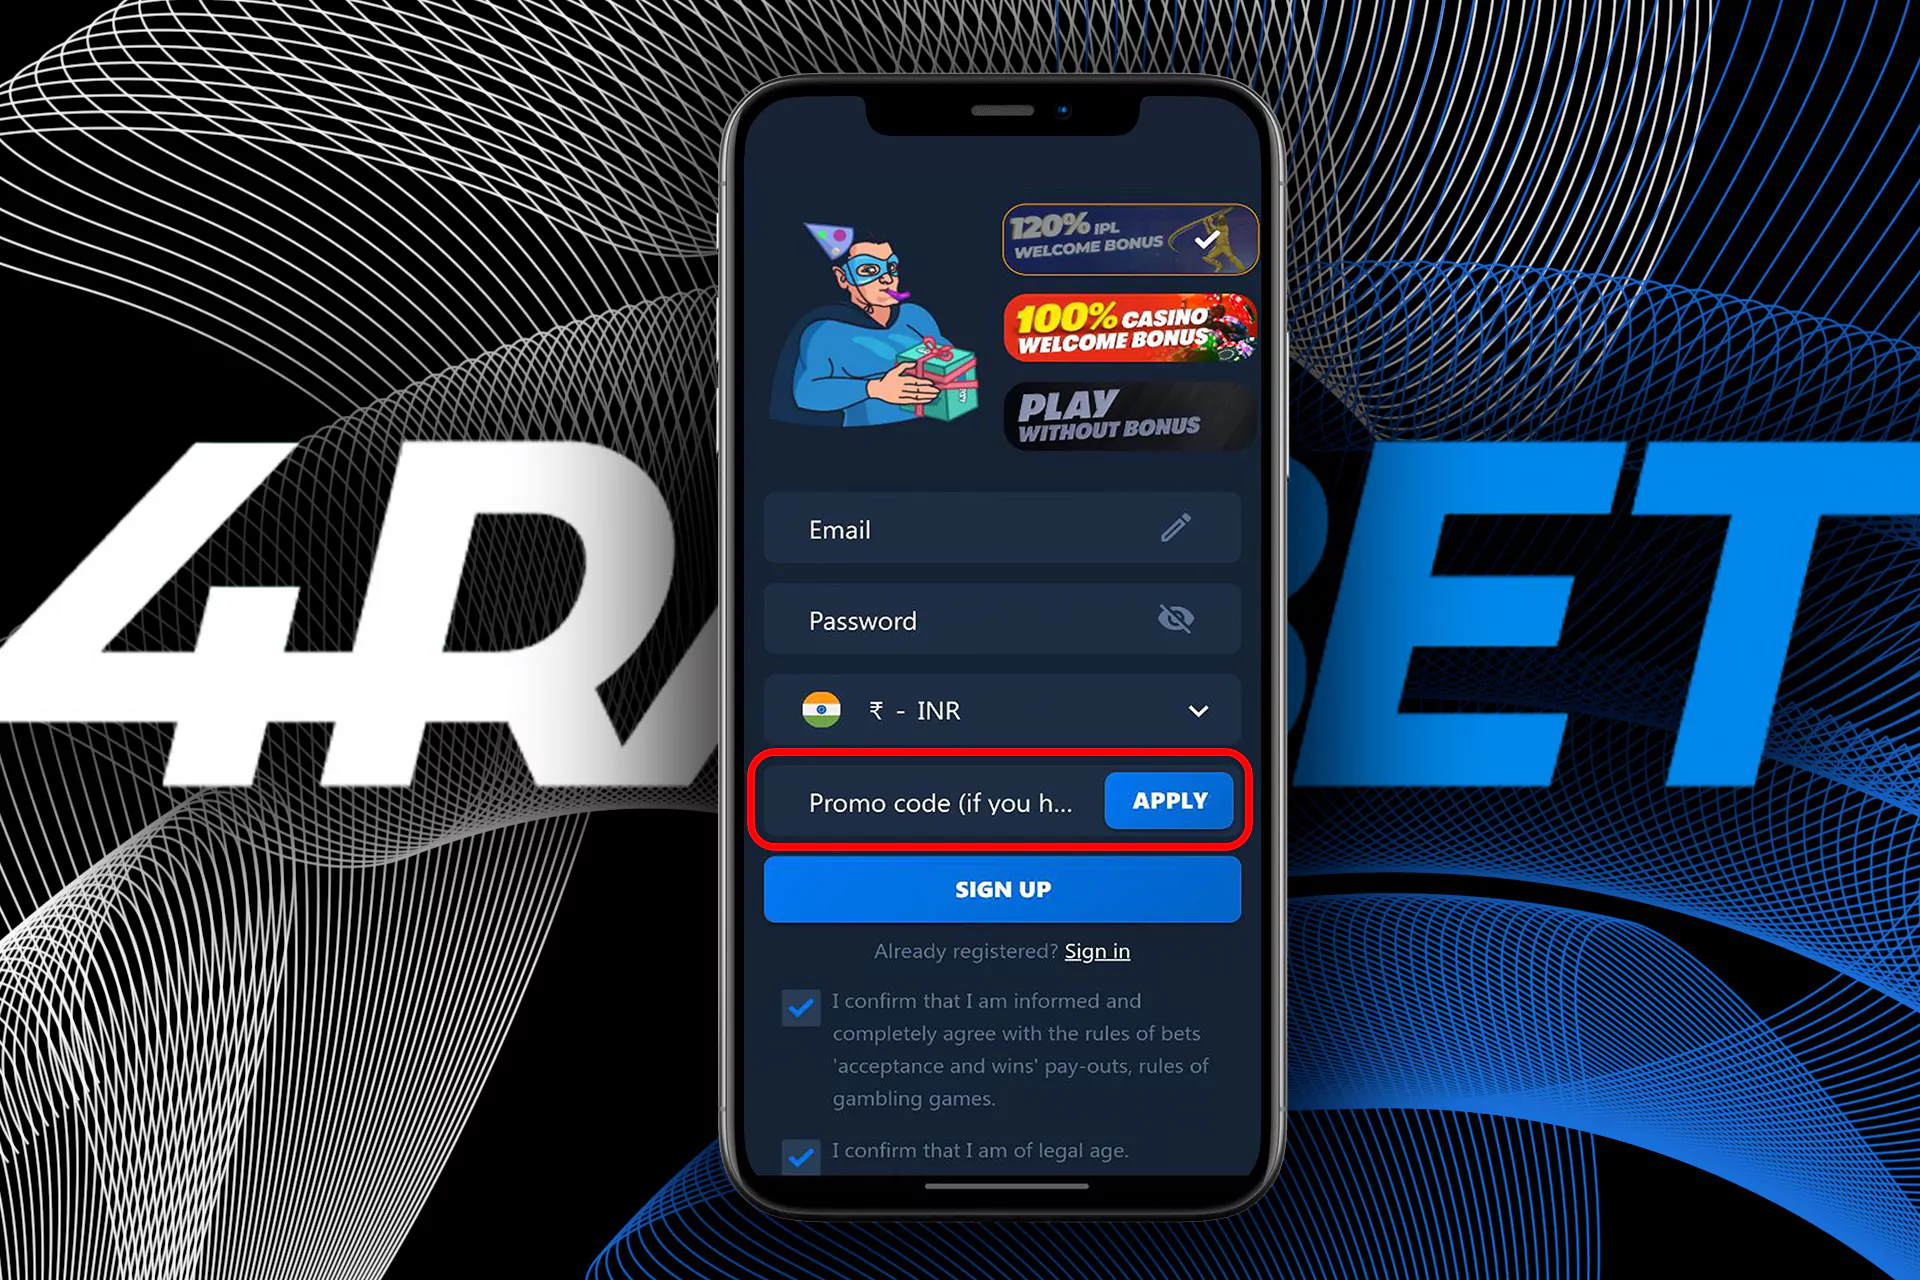 For new users who have downloaded the app, 4rabet offers the use of a promo code that will increase the amount of the regular welcome bonus.